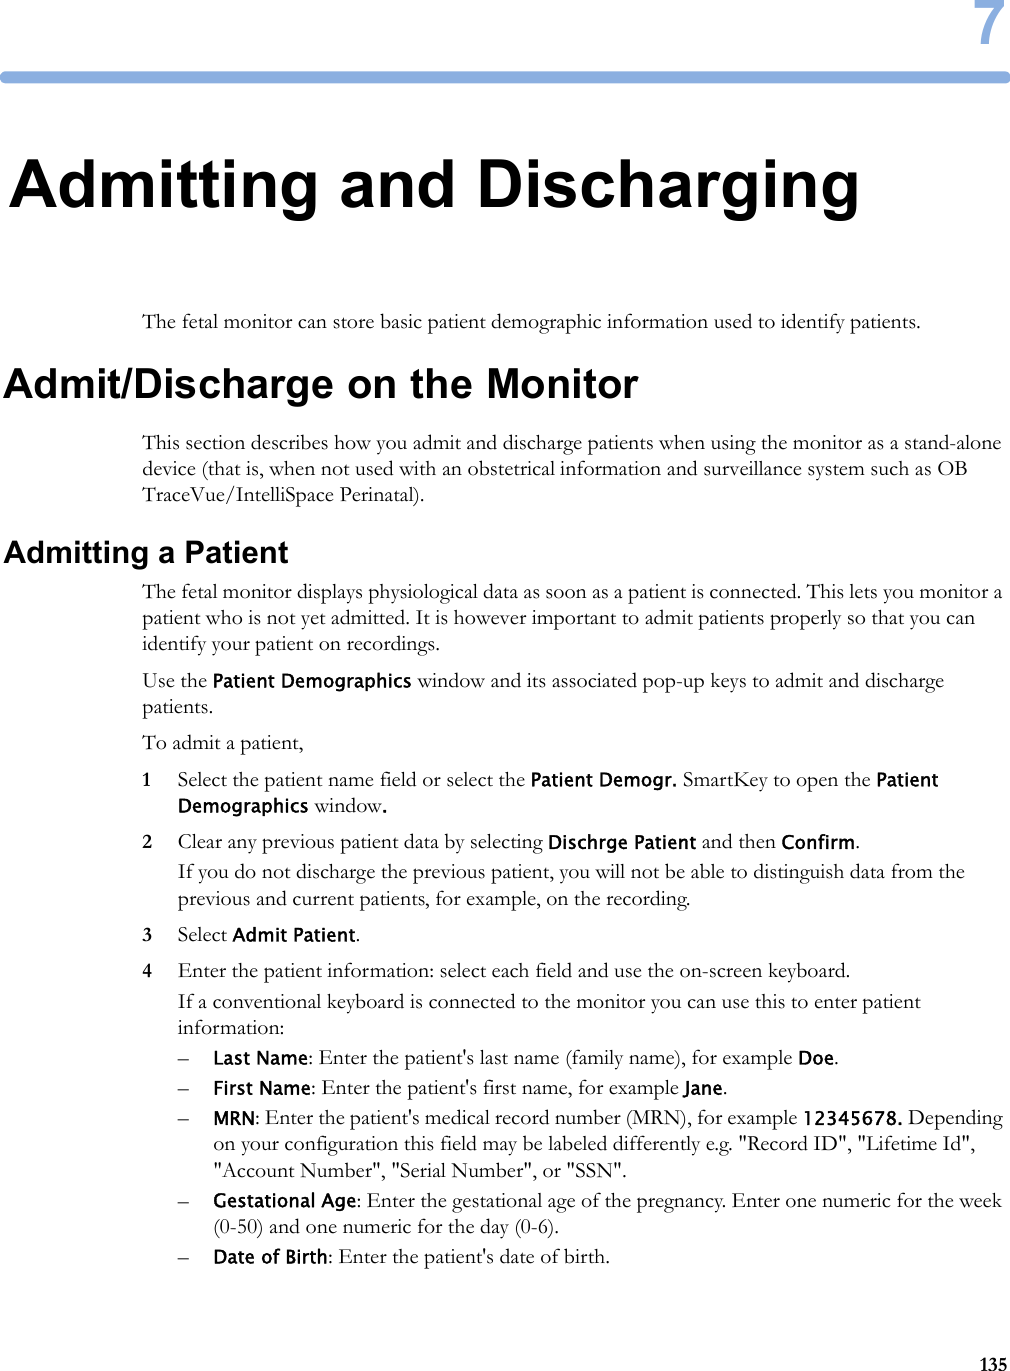 71357Admitting and DischargingThe fetal monitor can store basic patient demographic information used to identify patients.Admit/Discharge on the MonitorThis section describes how you admit and discharge patients when using the monitor as a stand-alone device (that is, when not used with an obstetrical information and surveillance system such as OB TraceVue/IntelliSpace Perinatal).Admitting a PatientThe fetal monitor displays physiological data as soon as a patient is connected. This lets you monitor a patient who is not yet admitted. It is however important to admit patients properly so that you can identify your patient on recordings.Use the Patient Demographics window and its associated pop-up keys to admit and discharge patients.To admit a patient,1Select the patient name field or select the Patient Demogr. SmartKey to open the Patient Demographics window.2Clear any previous patient data by selecting Dischrge Patient and then Confirm.If you do not discharge the previous patient, you will not be able to distinguish data from the previous and current patients, for example, on the recording.3Select Admit Patient.4Enter the patient information: select each field and use the on-screen keyboard.If a conventional keyboard is connected to the monitor you can use this to enter patient information:–Last Name: Enter the patient&apos;s last name (family name), for example Doe.–First Name: Enter the patient&apos;s first name, for example Jane.–MRN: Enter the patient&apos;s medical record number (MRN), for example 12345678. Depending on your configuration this field may be labeled differently e.g. &quot;Record ID&quot;, &quot;Lifetime Id&quot;, &quot;Account Number&quot;, &quot;Serial Number&quot;, or &quot;SSN&quot;.–Gestational Age: Enter the gestational age of the pregnancy. Enter one numeric for the week (0-50) and one numeric for the day (0-6).–Date of Birth: Enter the patient&apos;s date of birth. 